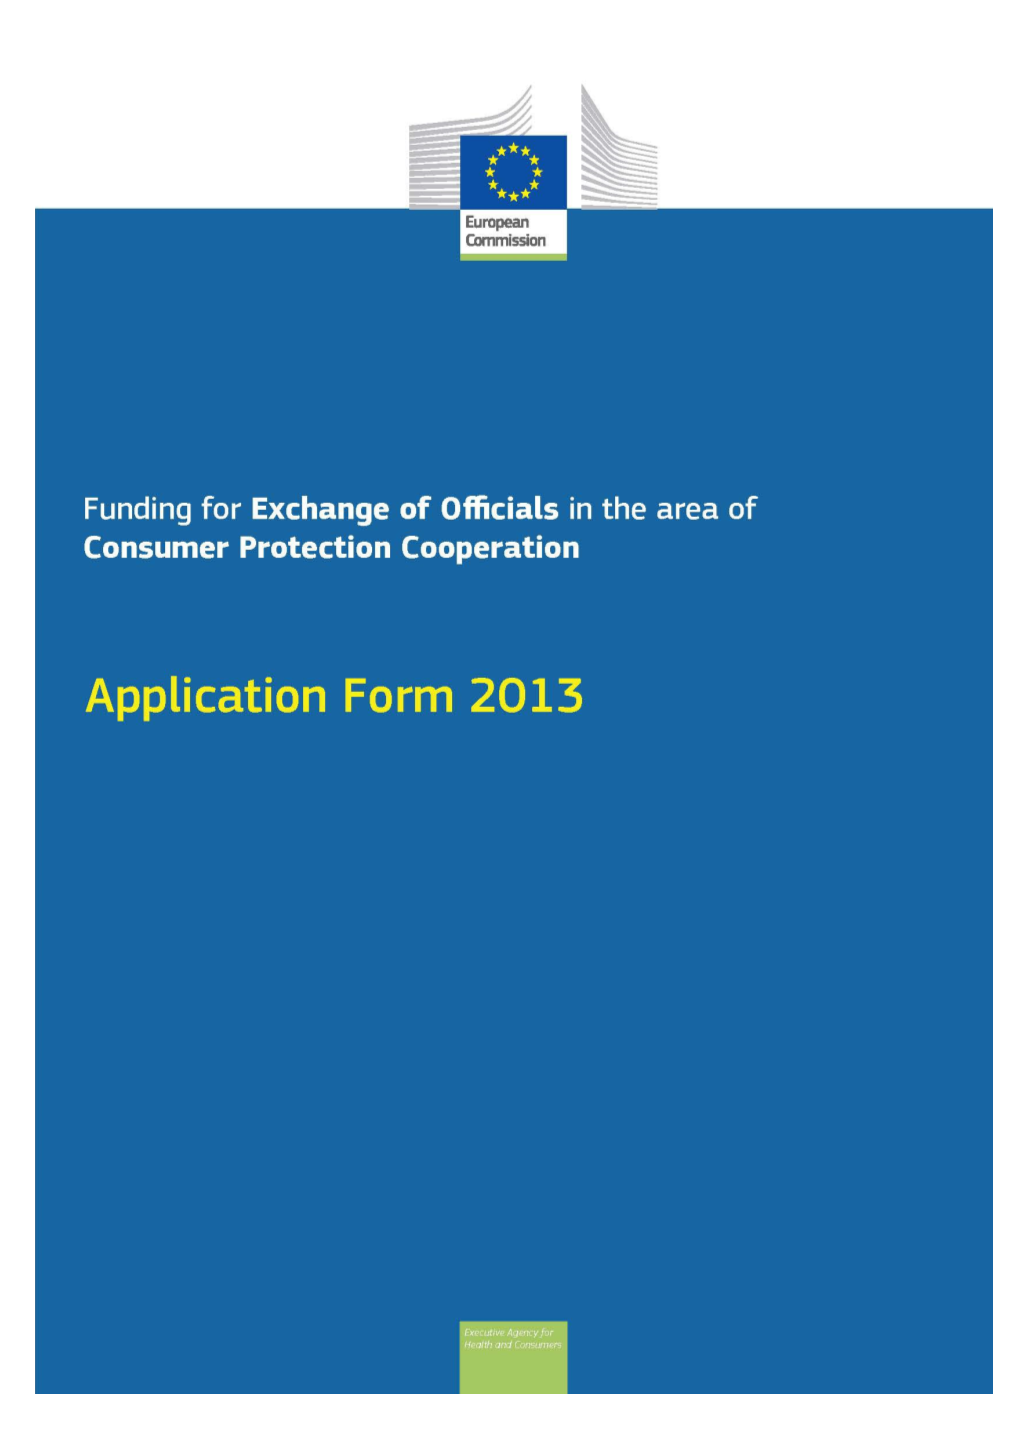 Funding for the Exchange of Officials in the Area of Consumer Protection Cooperation